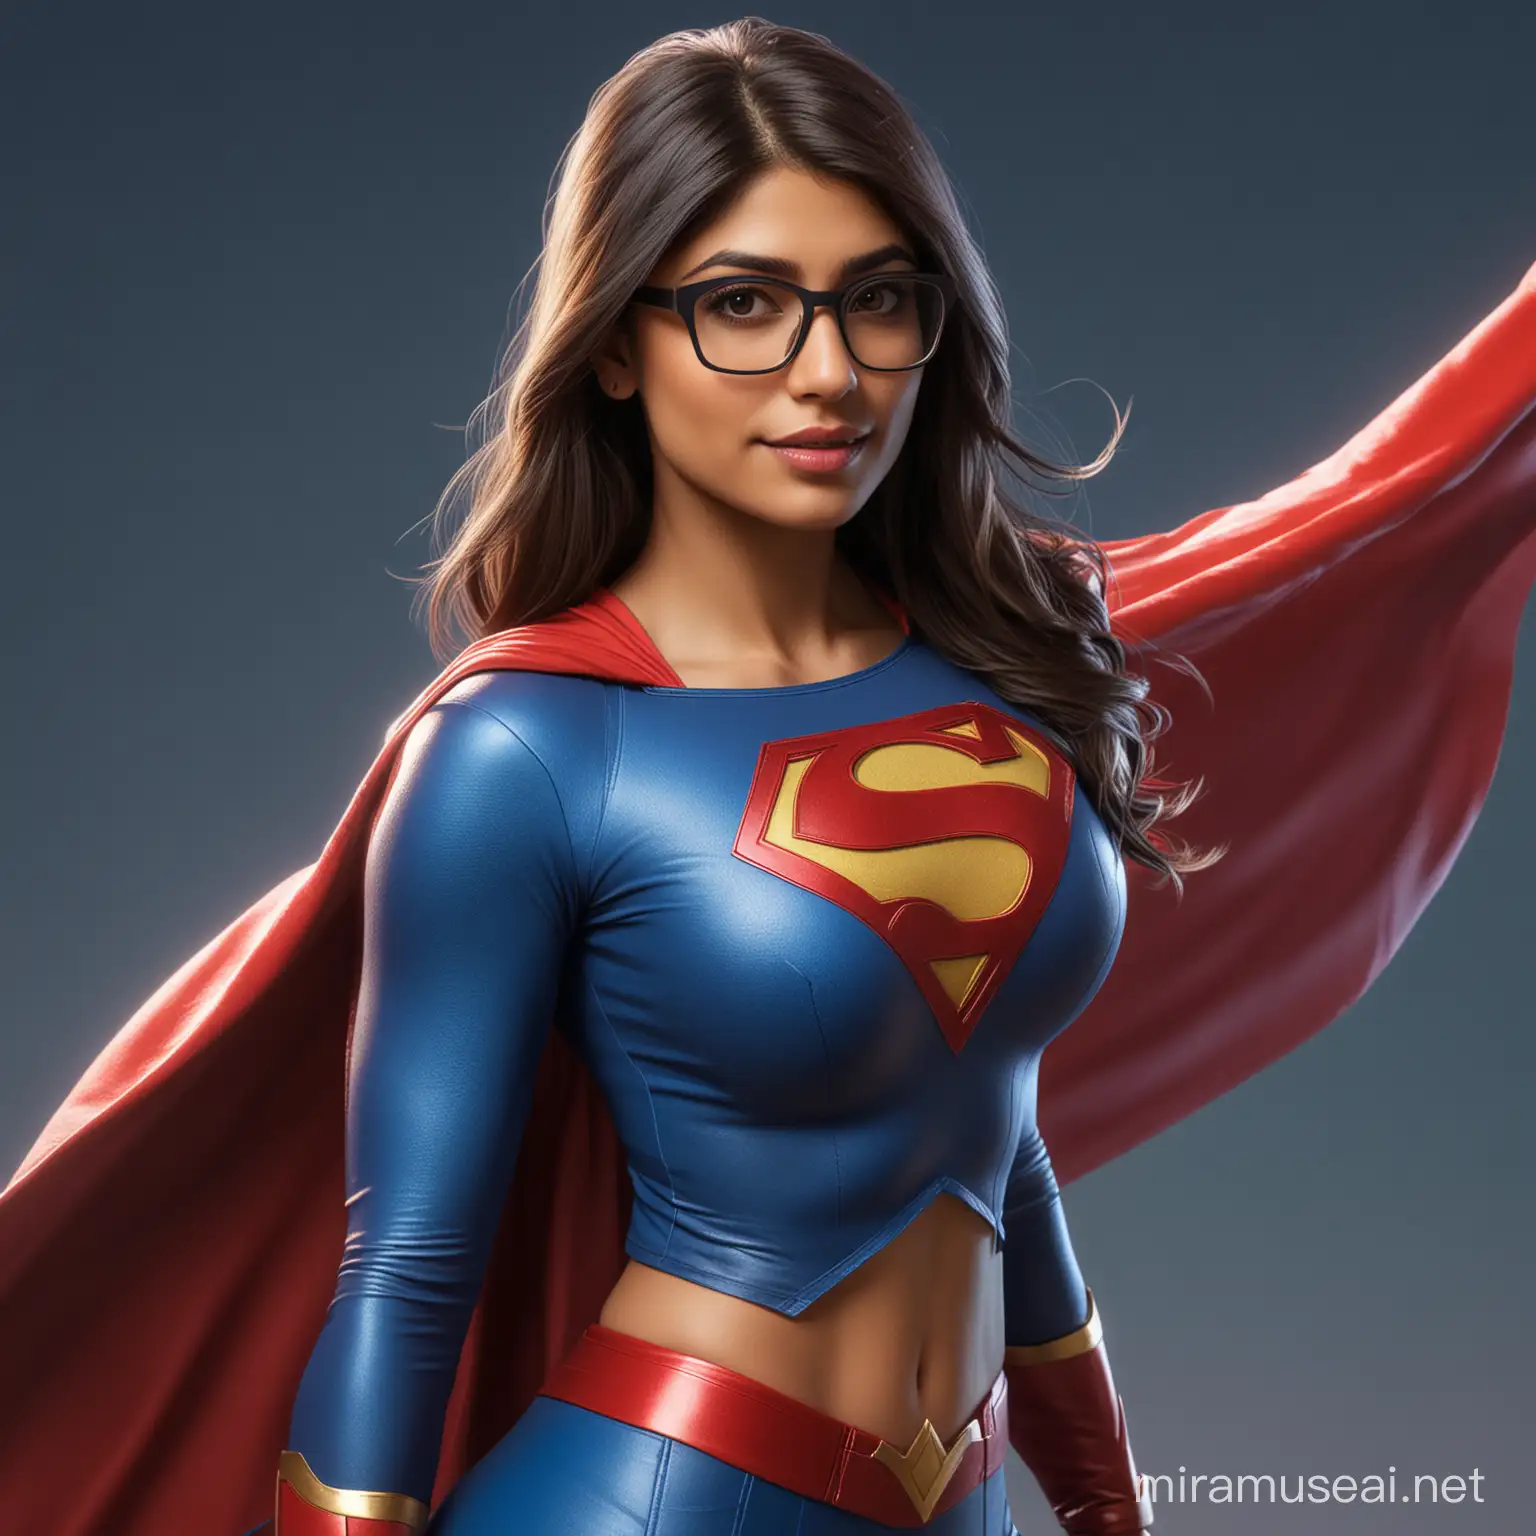 Mia Khalifa Cosplaying as Supergirl Vibrant Fantasy Concept Art in 8K Resolution